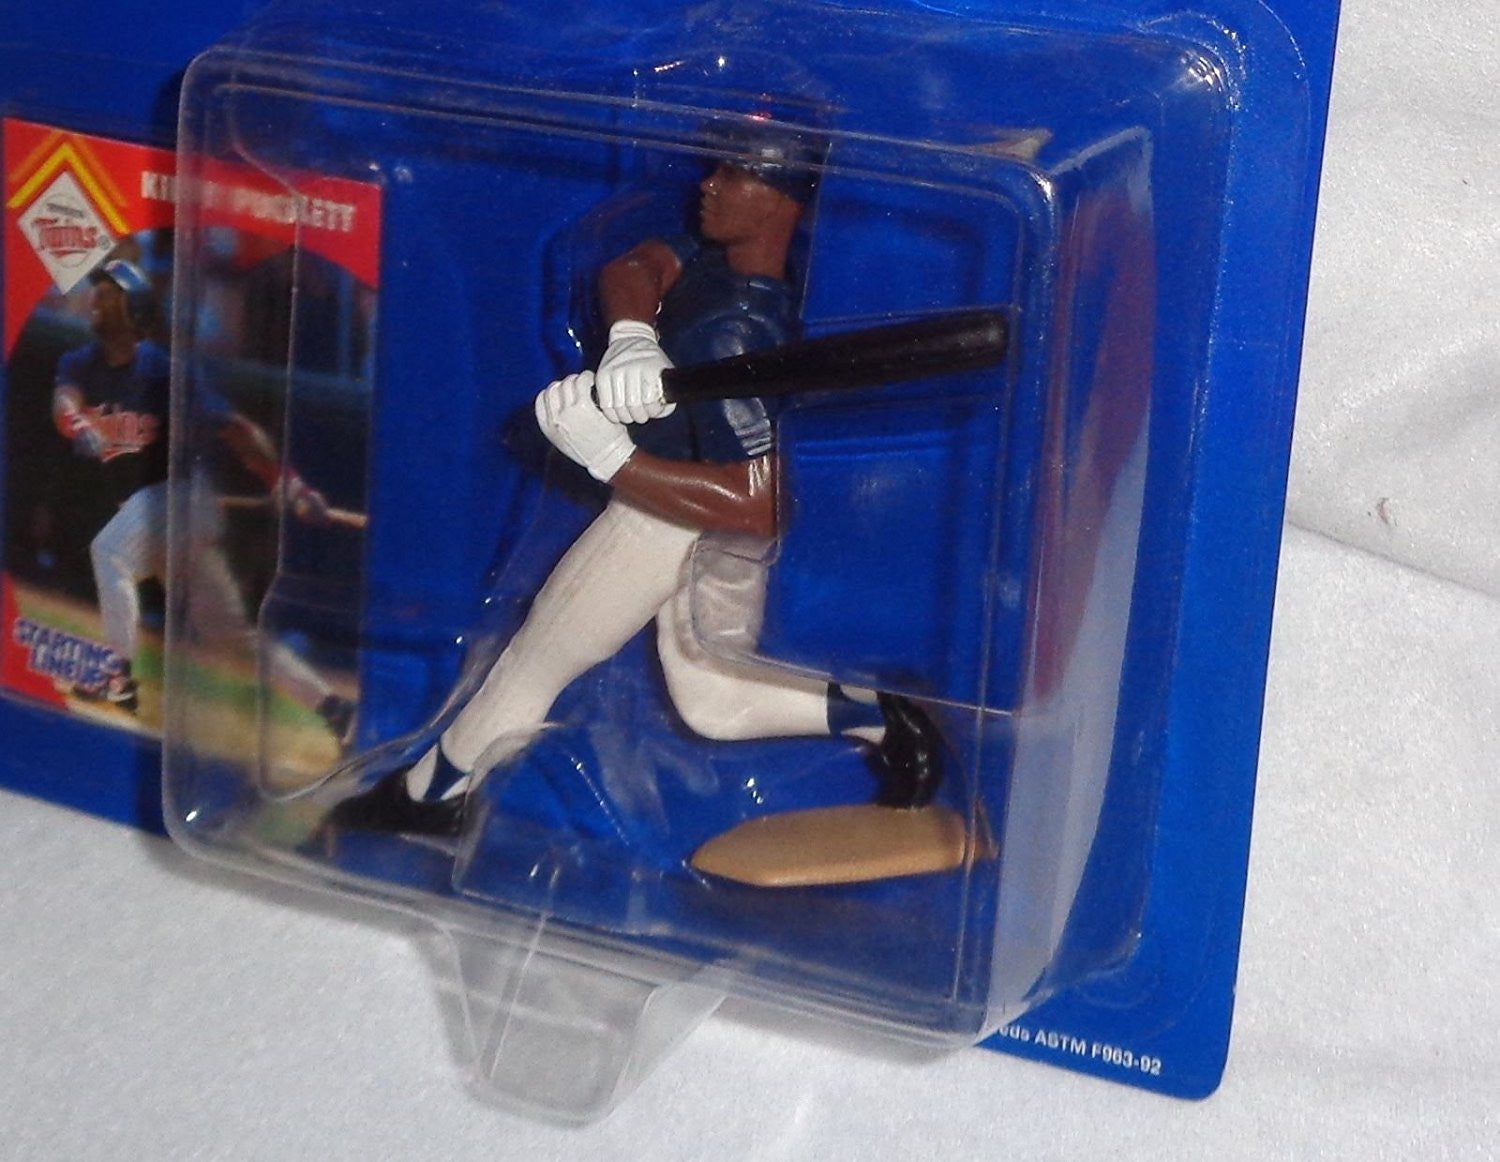 1995 Starting Lineup MLB Kirby Puckett #34 - Minnesota Twins - Vintage Action Figure - w/ Trading Card - Limited Edition - Collectible